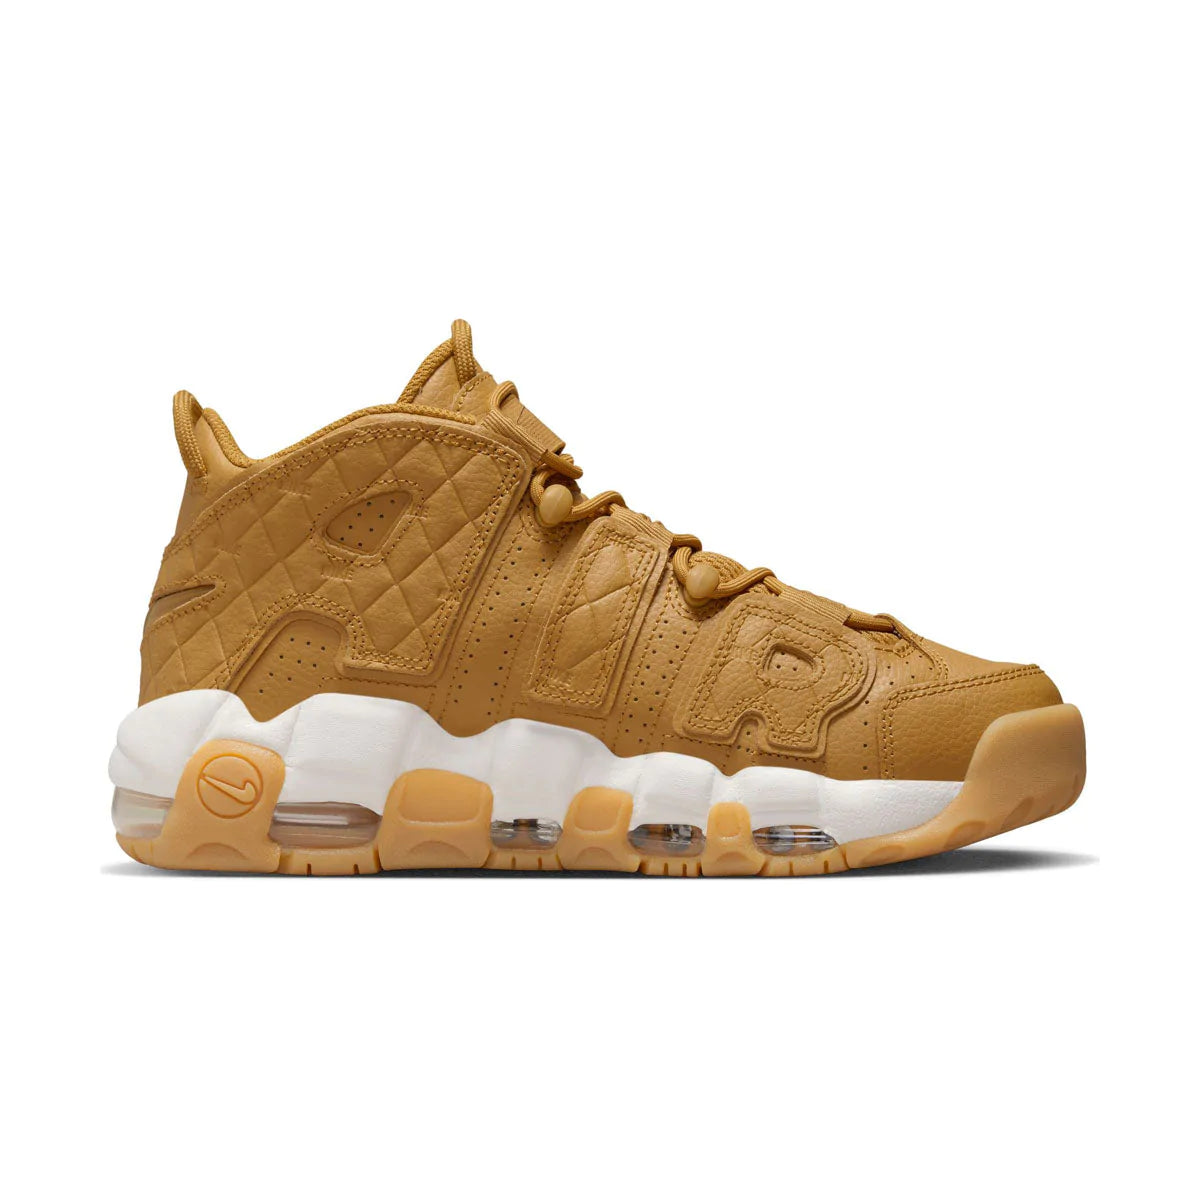 Sizing of Nike Uptempo Shoes: How Do They Fit? - Millennium Shoes